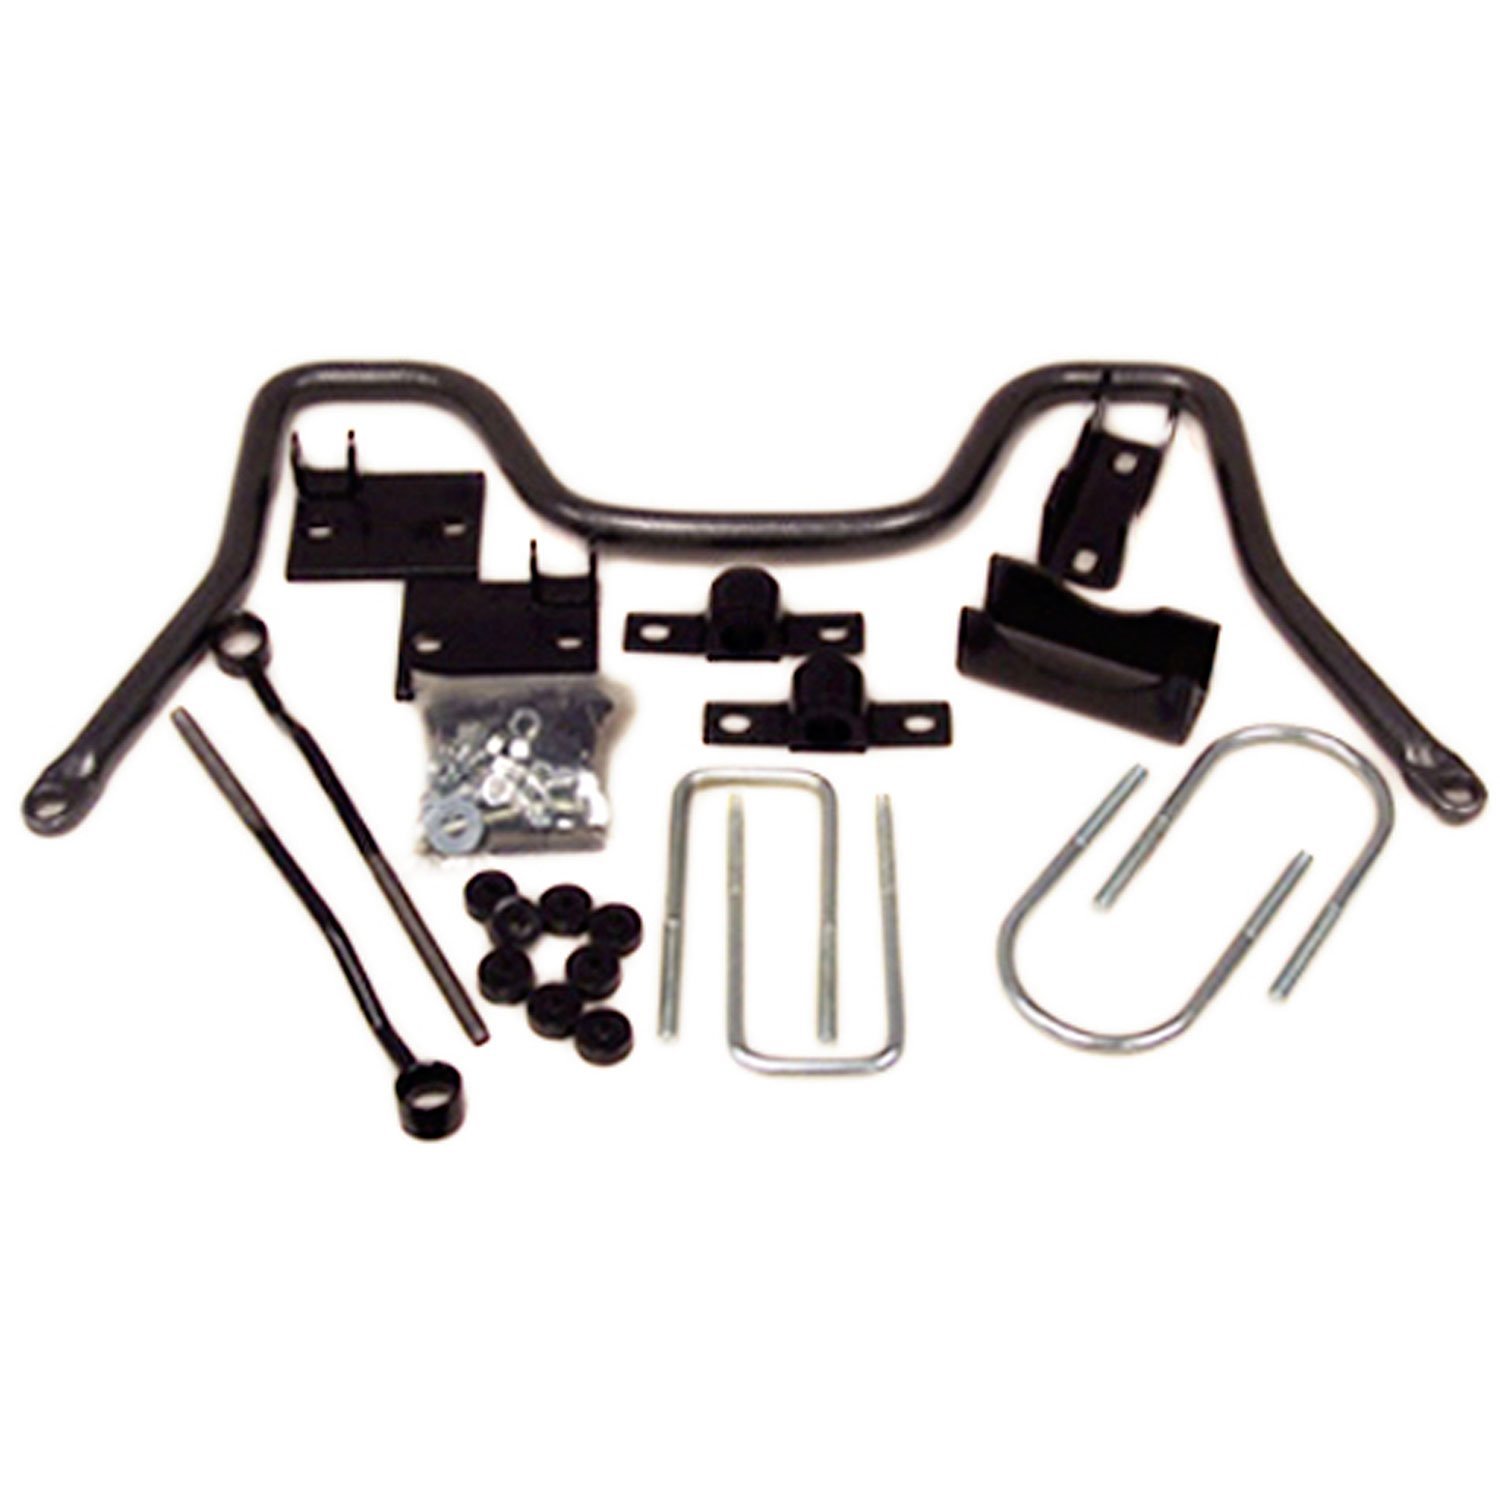 Rear Sway Bar for 2003-2008 Dodge Ram 2500/3500 2/4WD without 6.7L Diesel and with 4" Diameter Axle Tubes